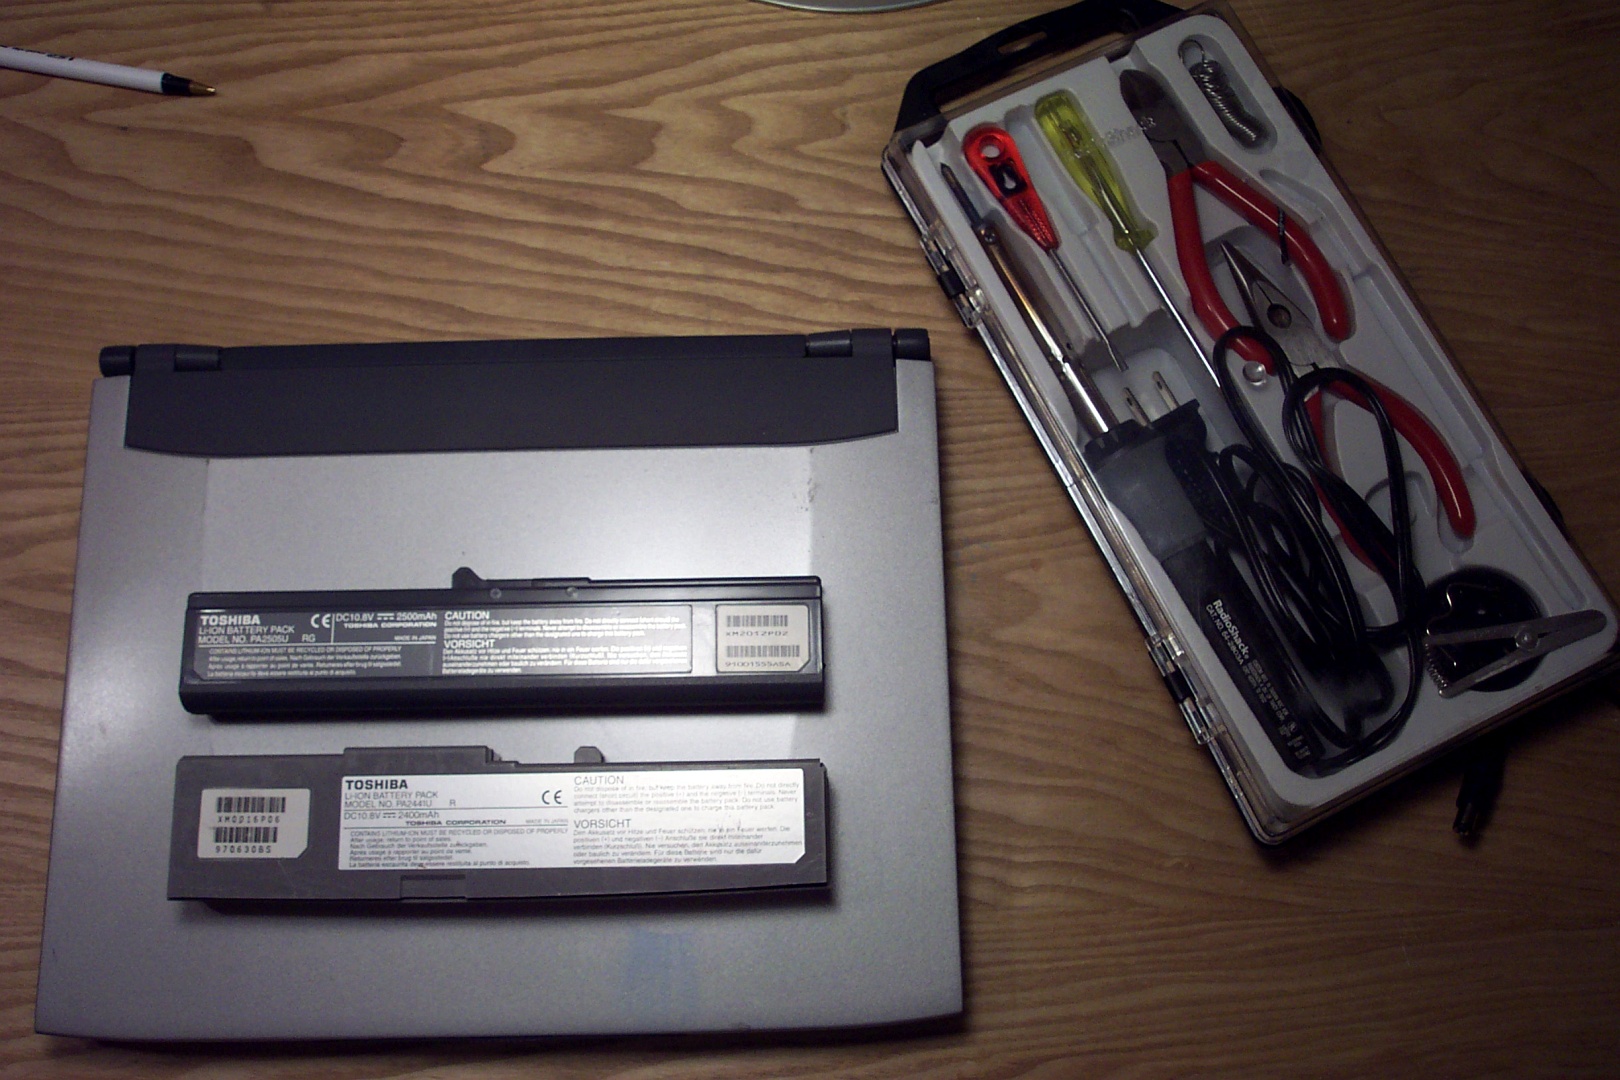 Two laptop batteries, unopened, sitting next to an electronics toolkit containing a soldering iron, screwdrivers, wirecutters, and a spool of solder